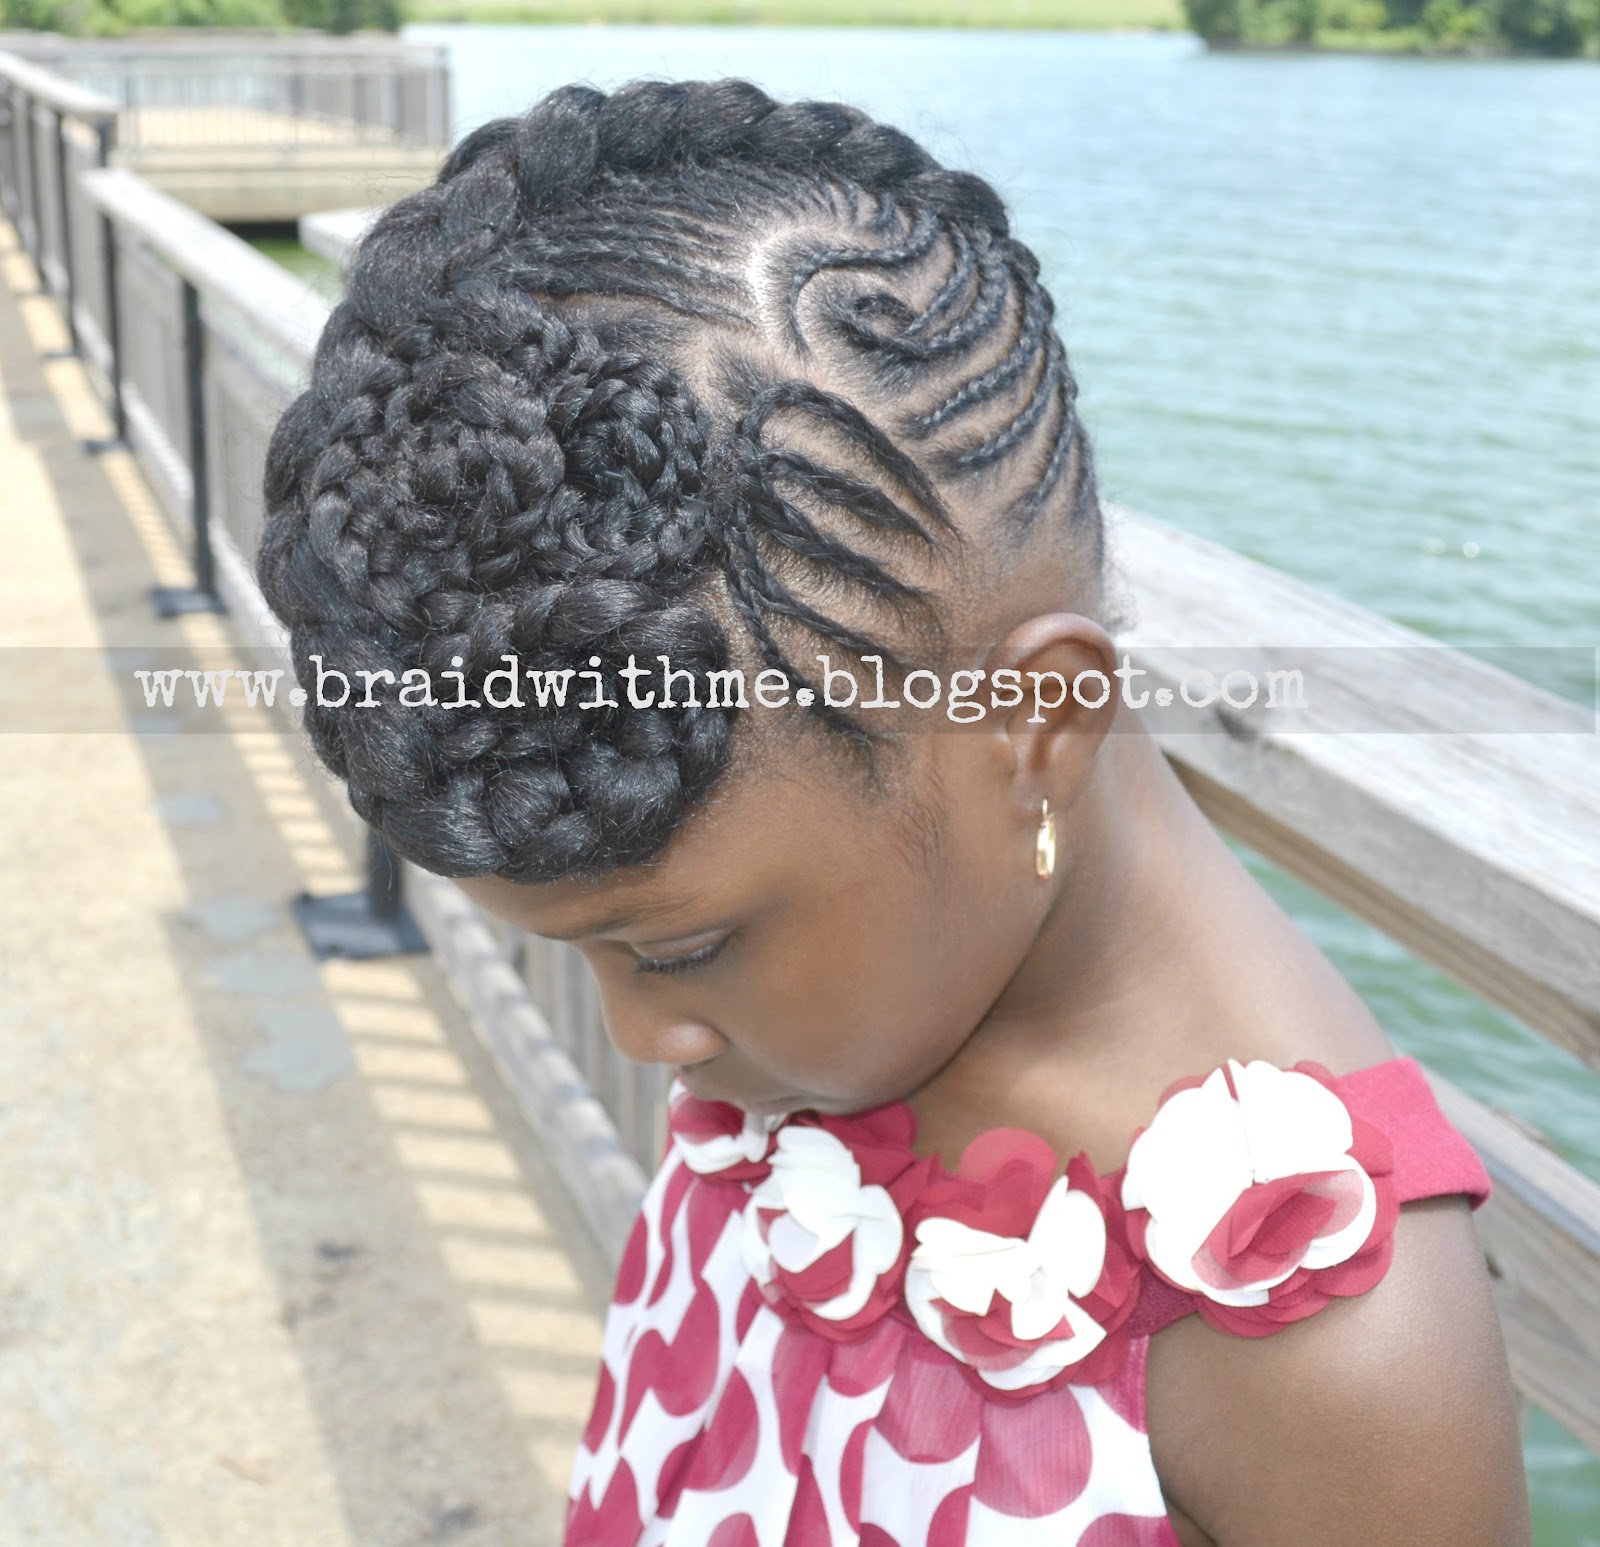 Braid with Me: Intricate Cornrow Updo on Natural Hair